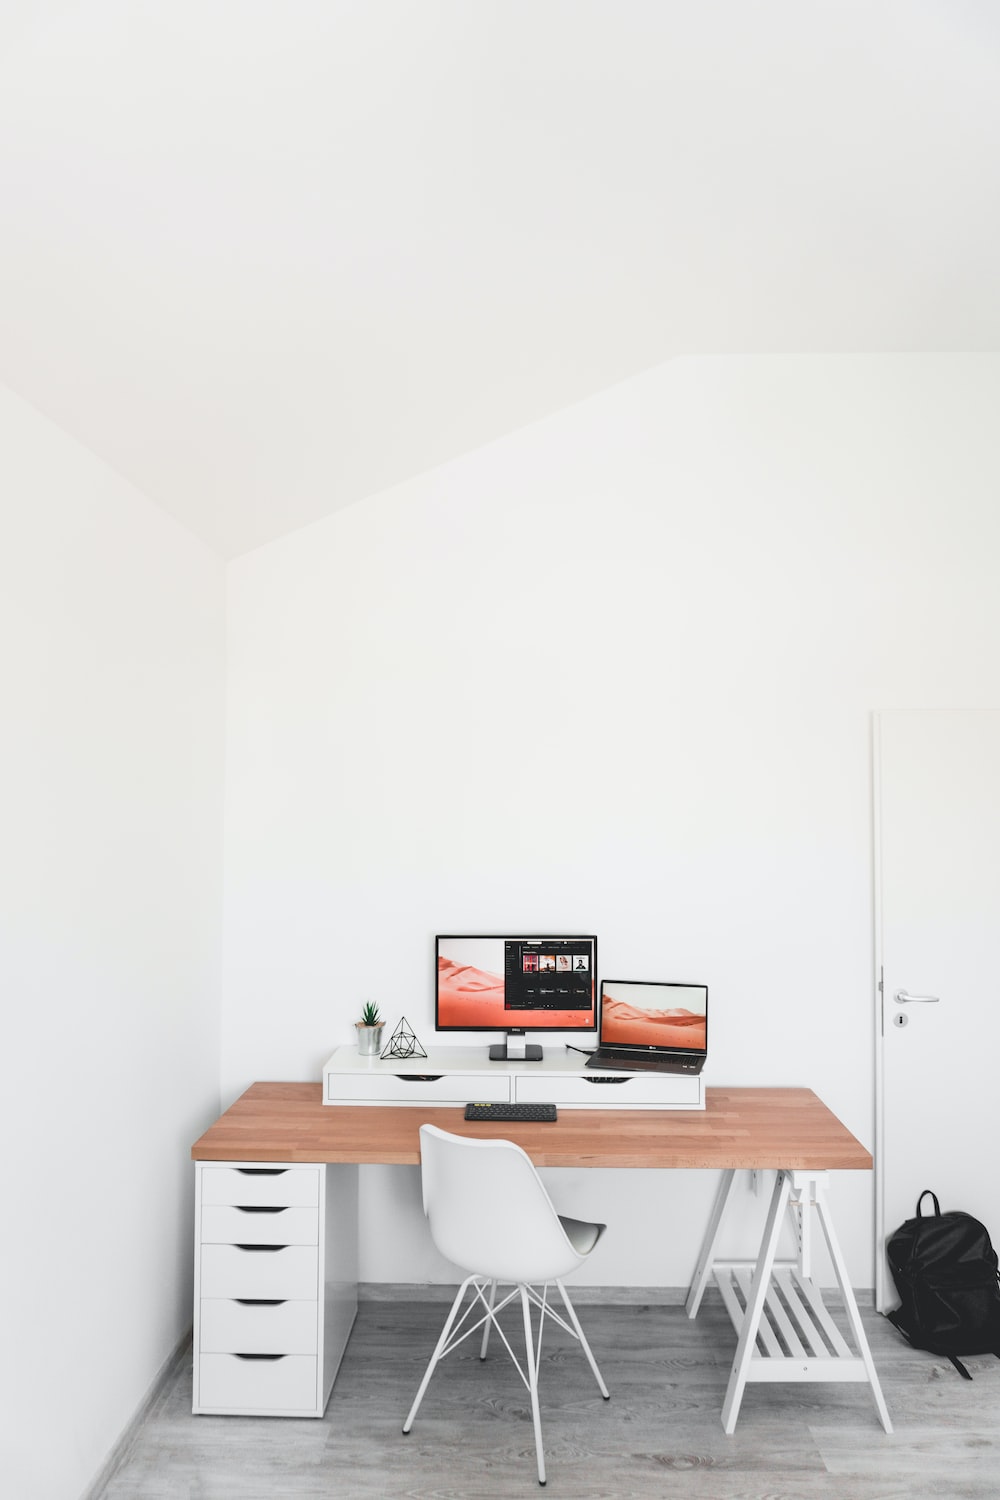 What different ways of arranging desks in an office may be used?